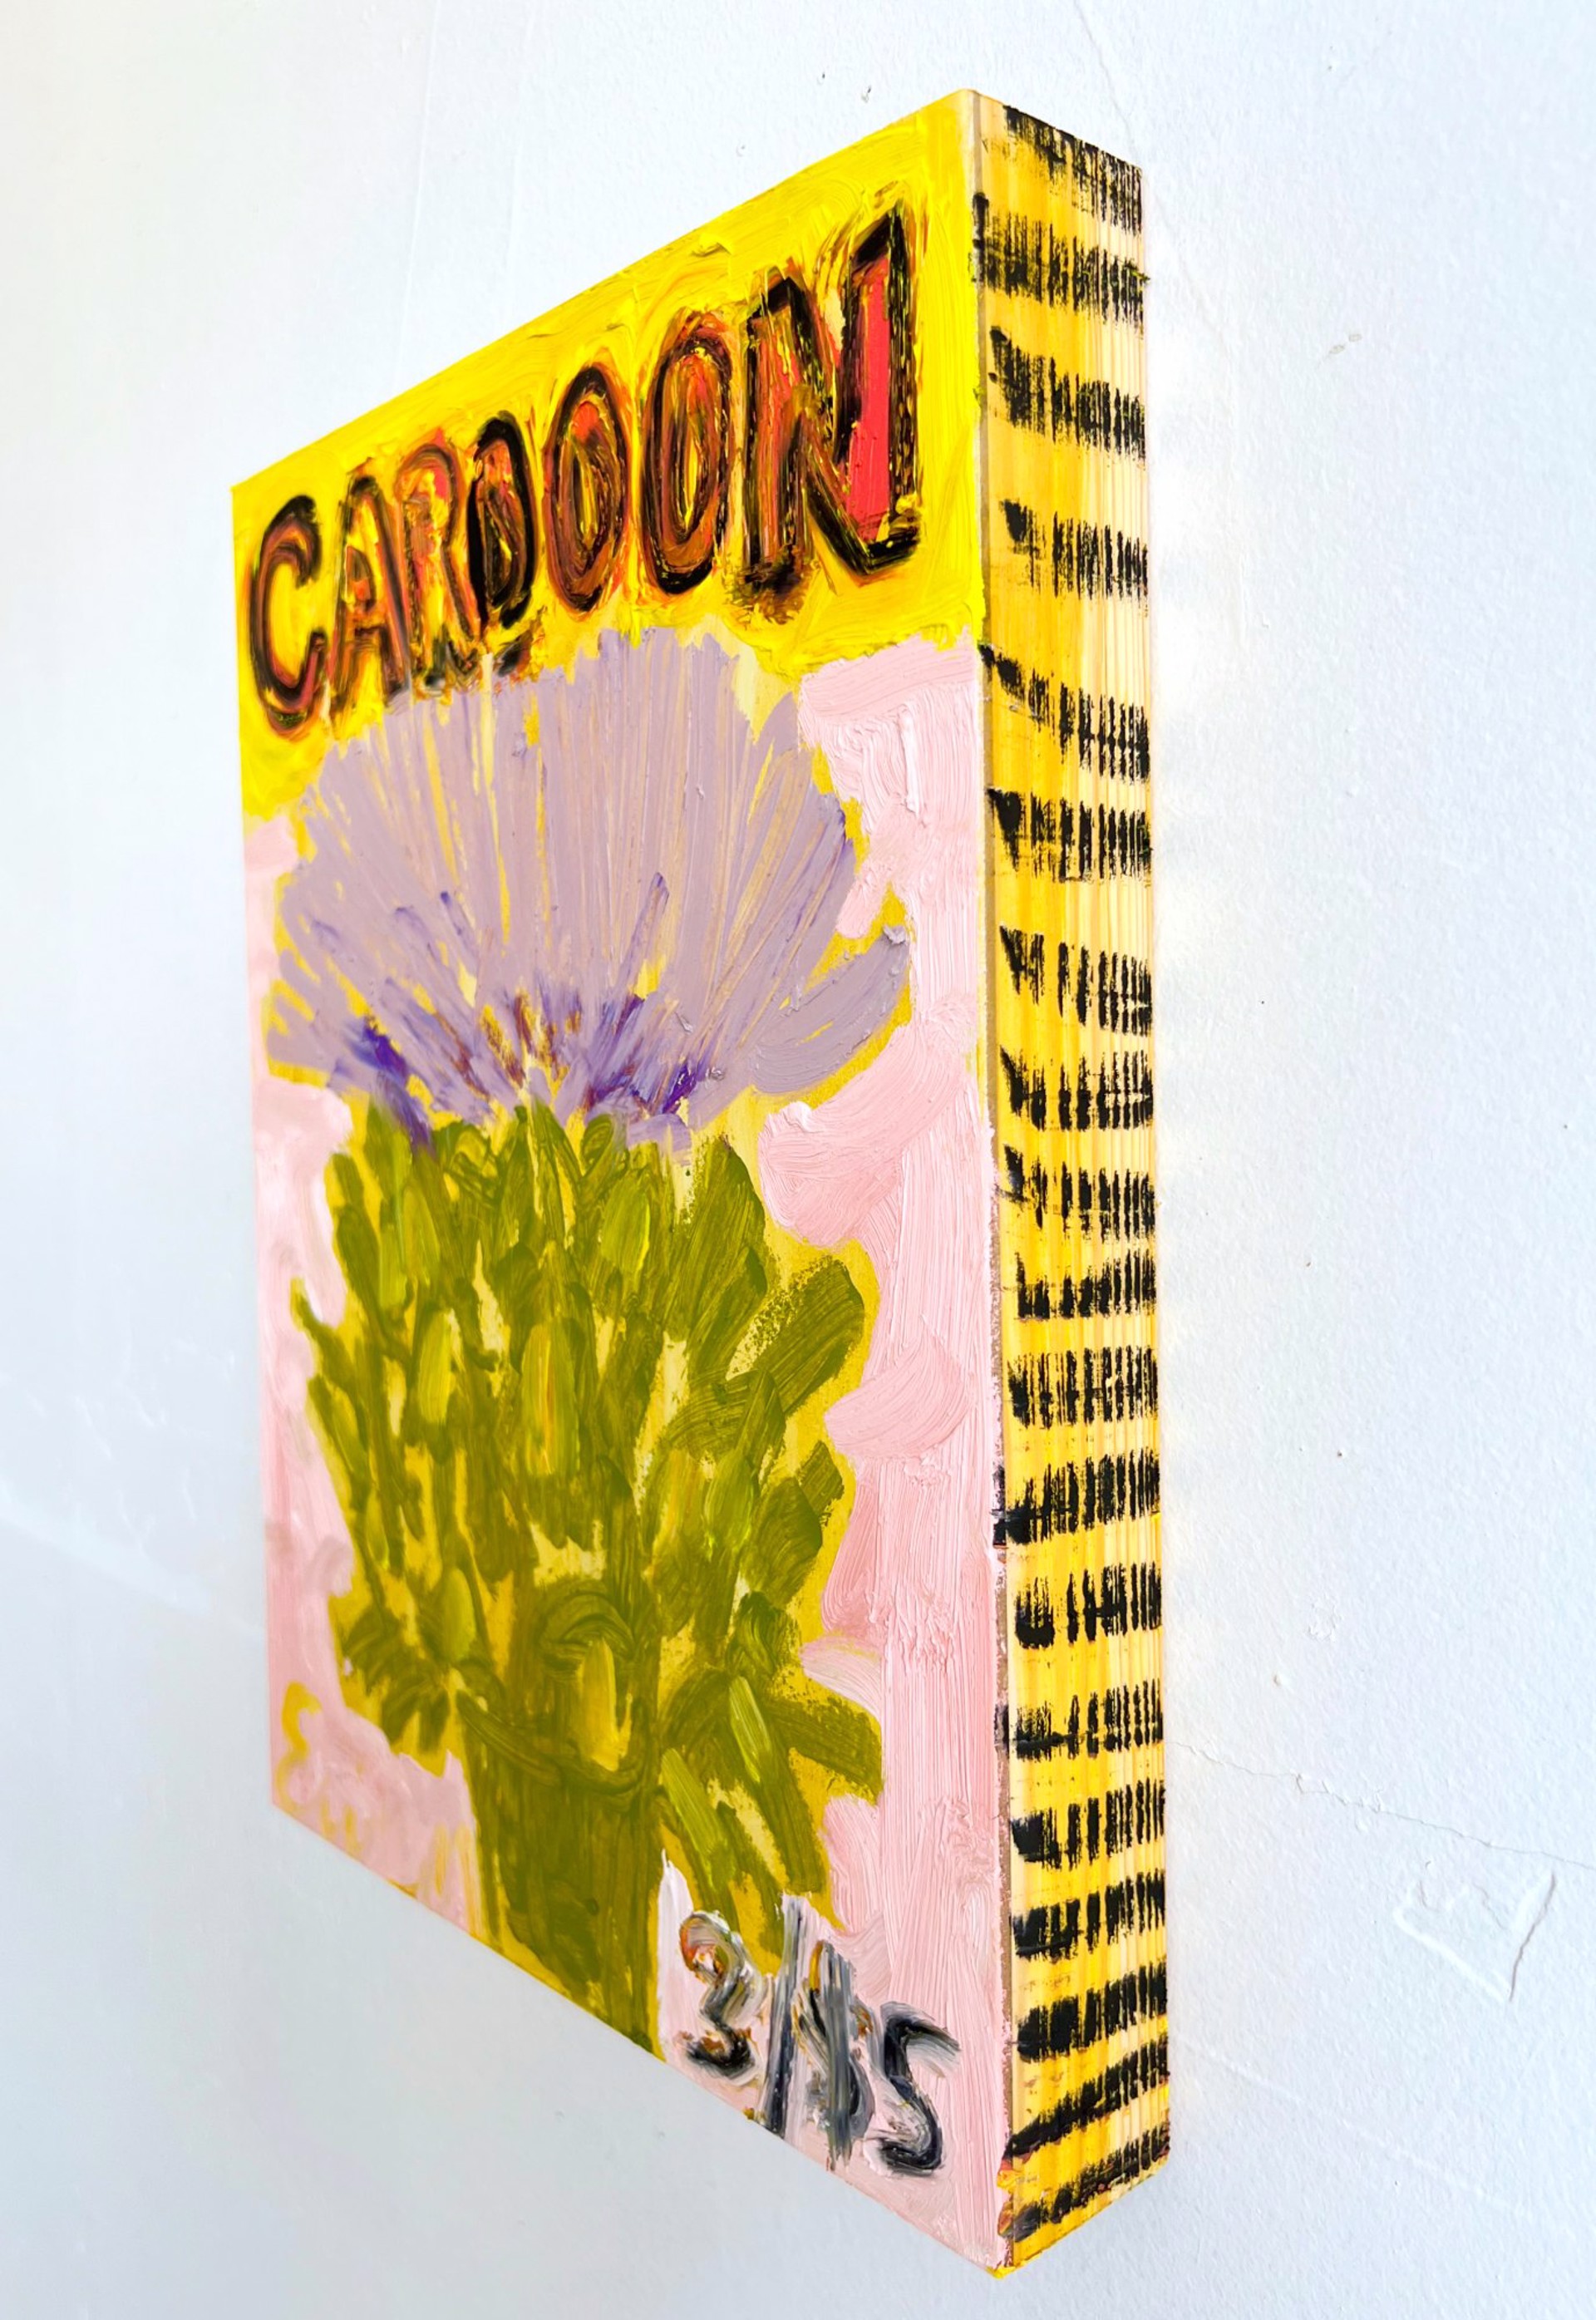 Cardoon with Yellow Background by Anne-Louise Ewen